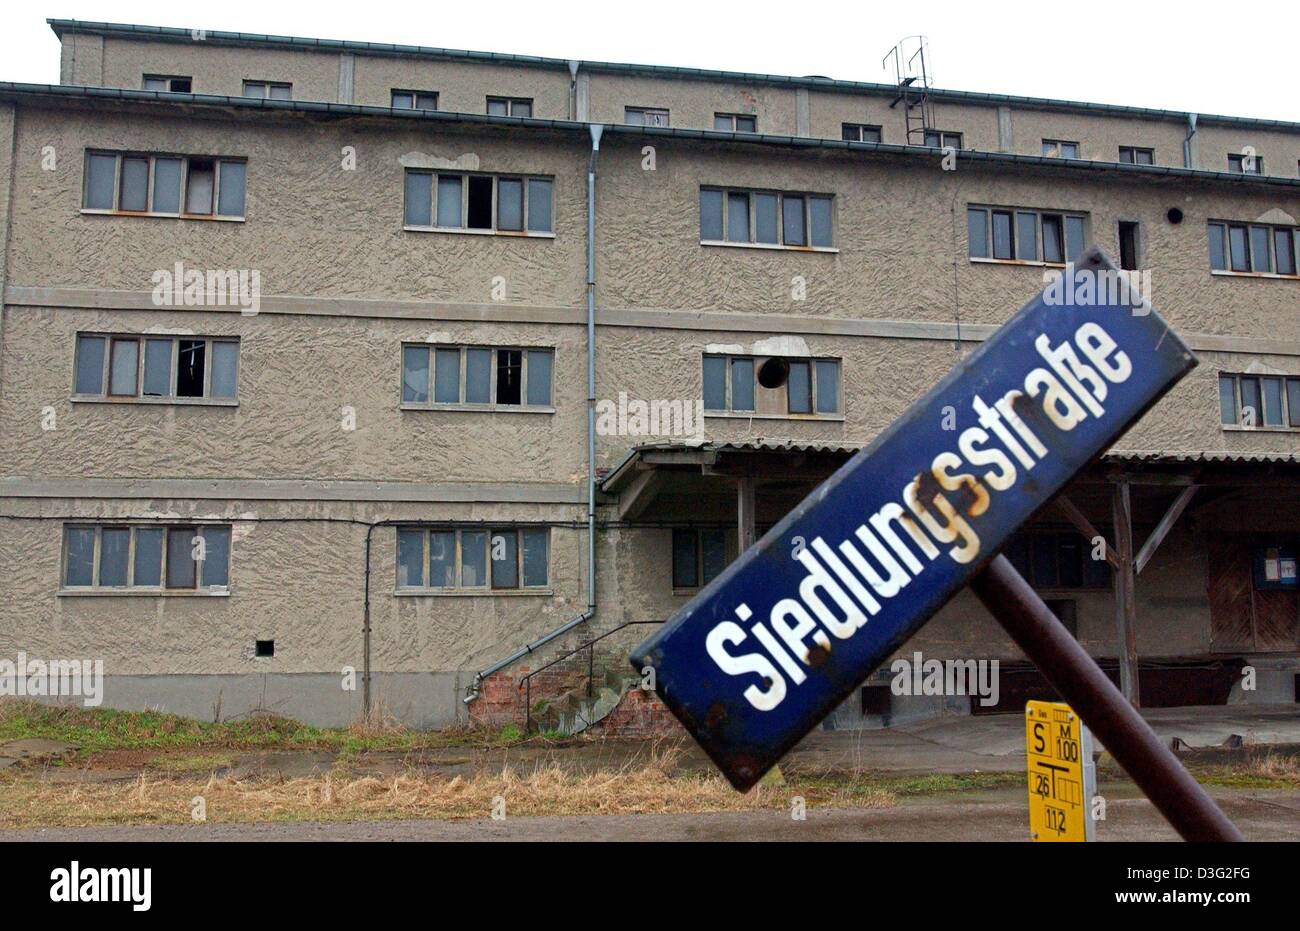 (dpa) - A halfway toppled down road sign stands in front of a deserted and derelict house in the eastern German town of Bleyen-Genschmar, Germany, 11 March 2003. The village, with around 600 inhabitants, has a rate of 57,6 percent unemployment. According to the mayor the community is powerless to do anything about their misery. There is no money left for further education and emplo Stock Photo